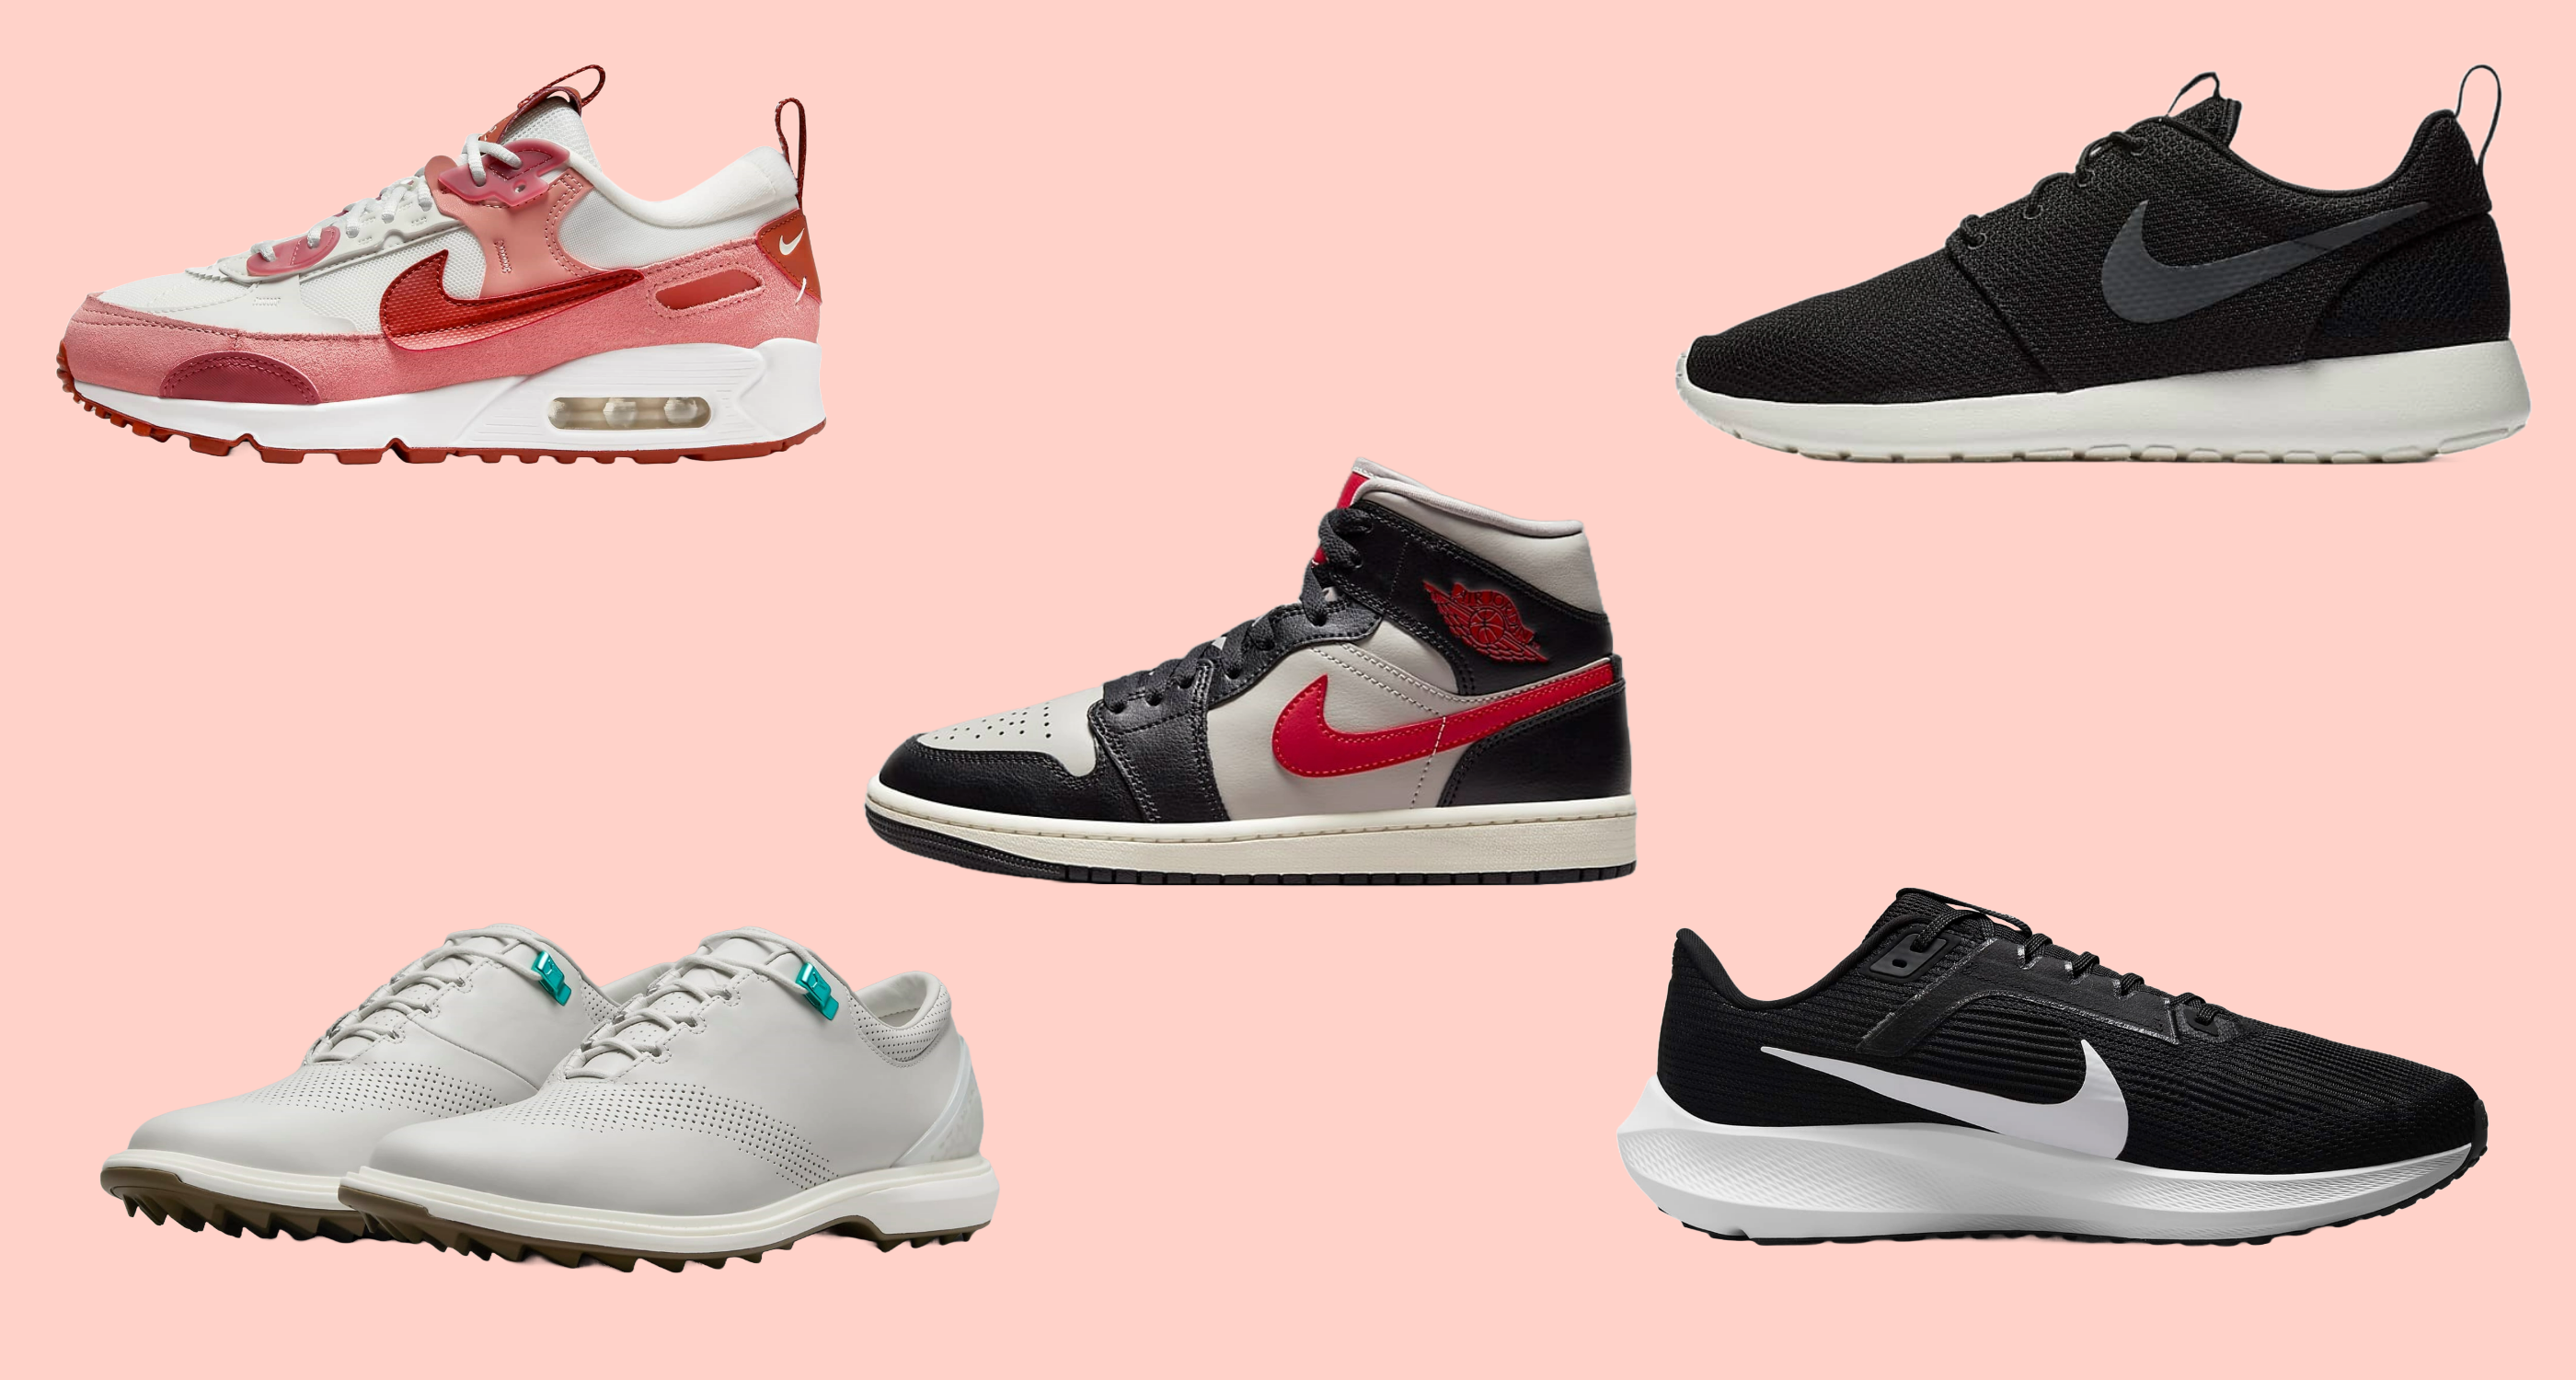 Best Nike clearance deals: Save up to 40% on Air Jordans, Pegasus 40s and more shoes this week